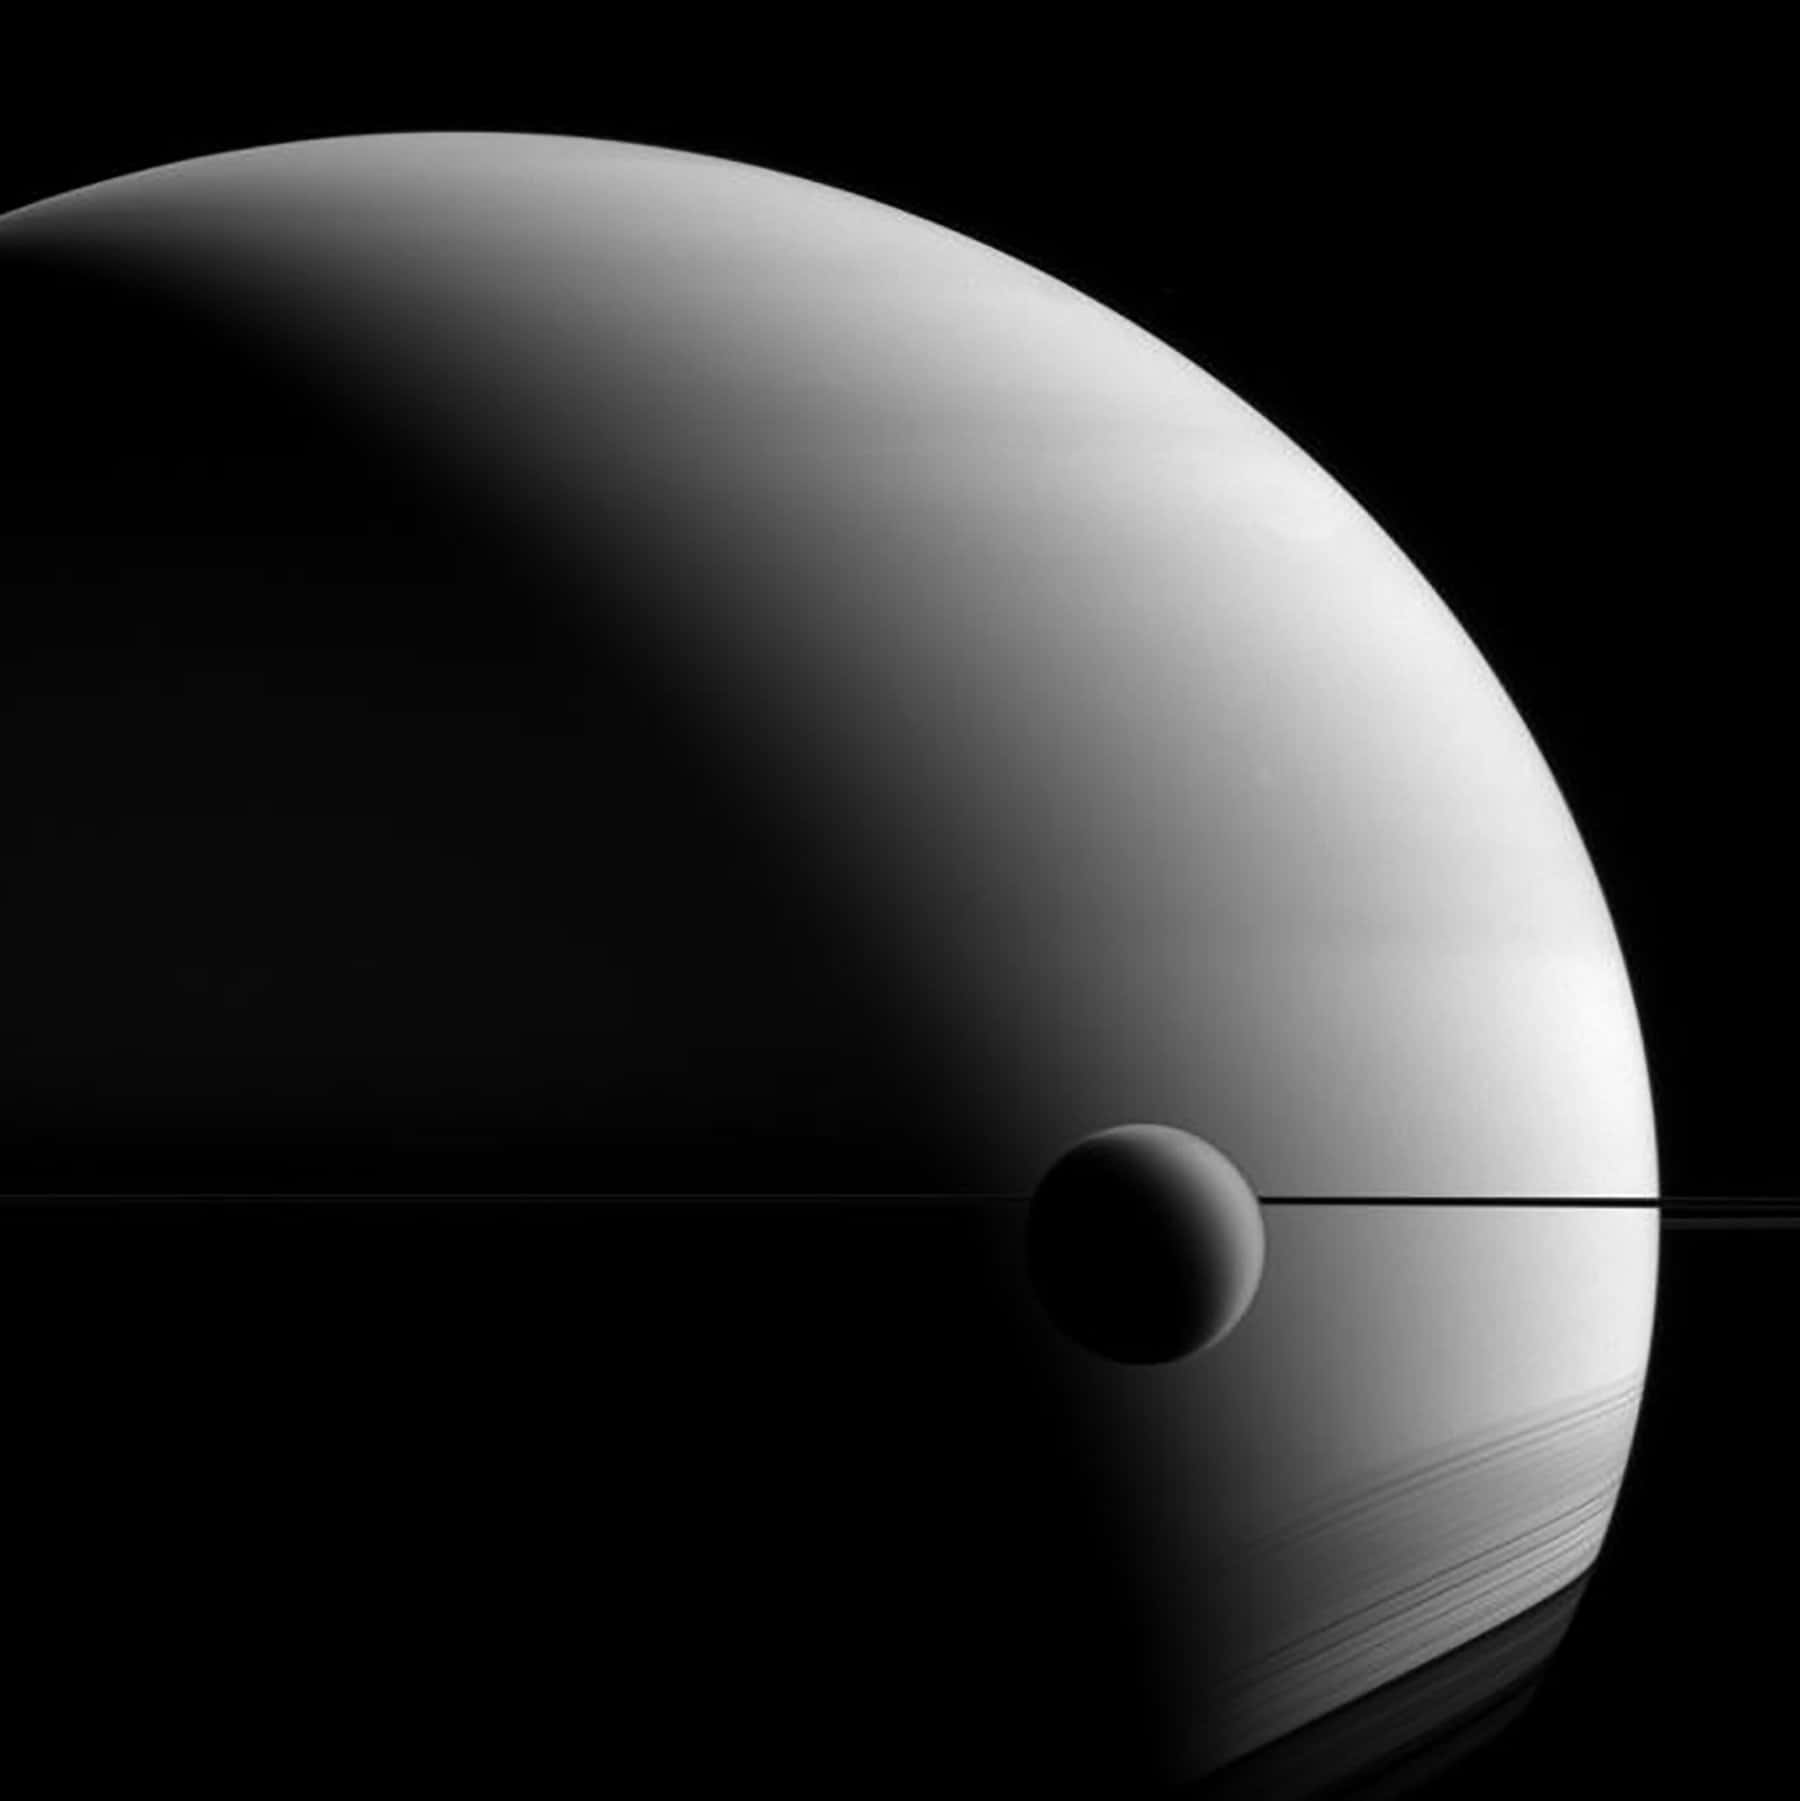 Experience the mesmerizing beauty of Saturn